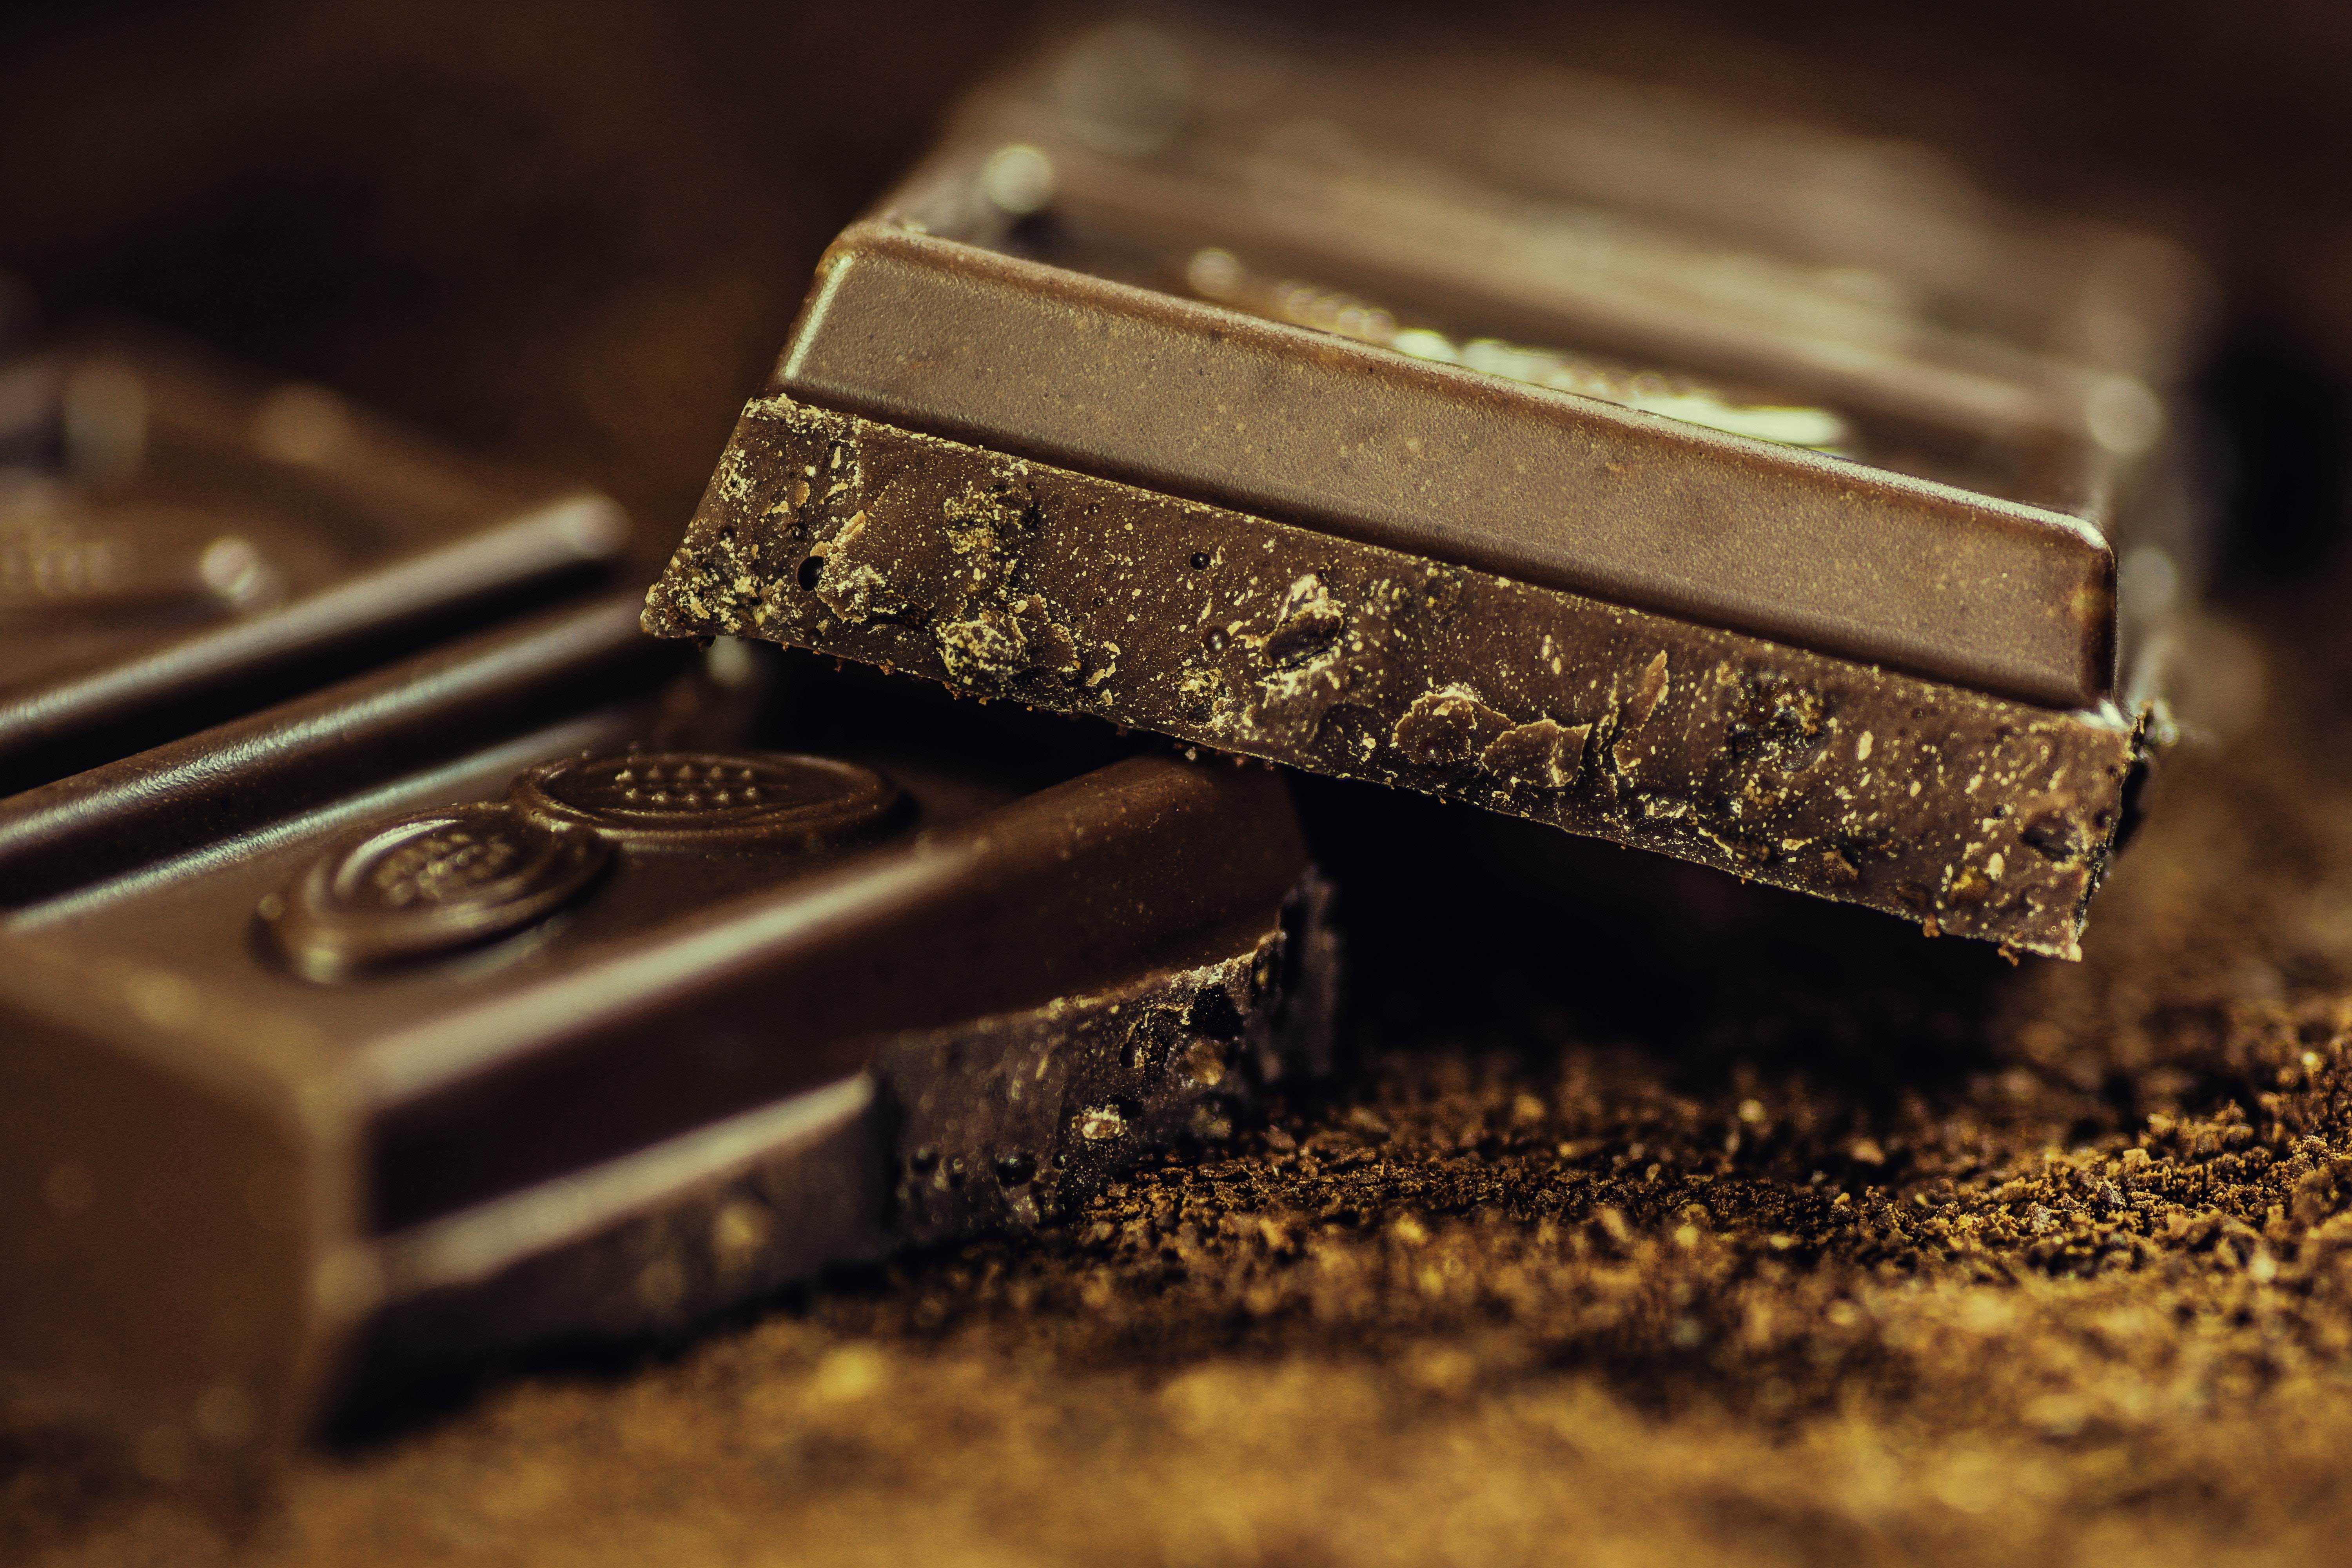 10 Surprising Health Benefits of Chocolate You Never Knew